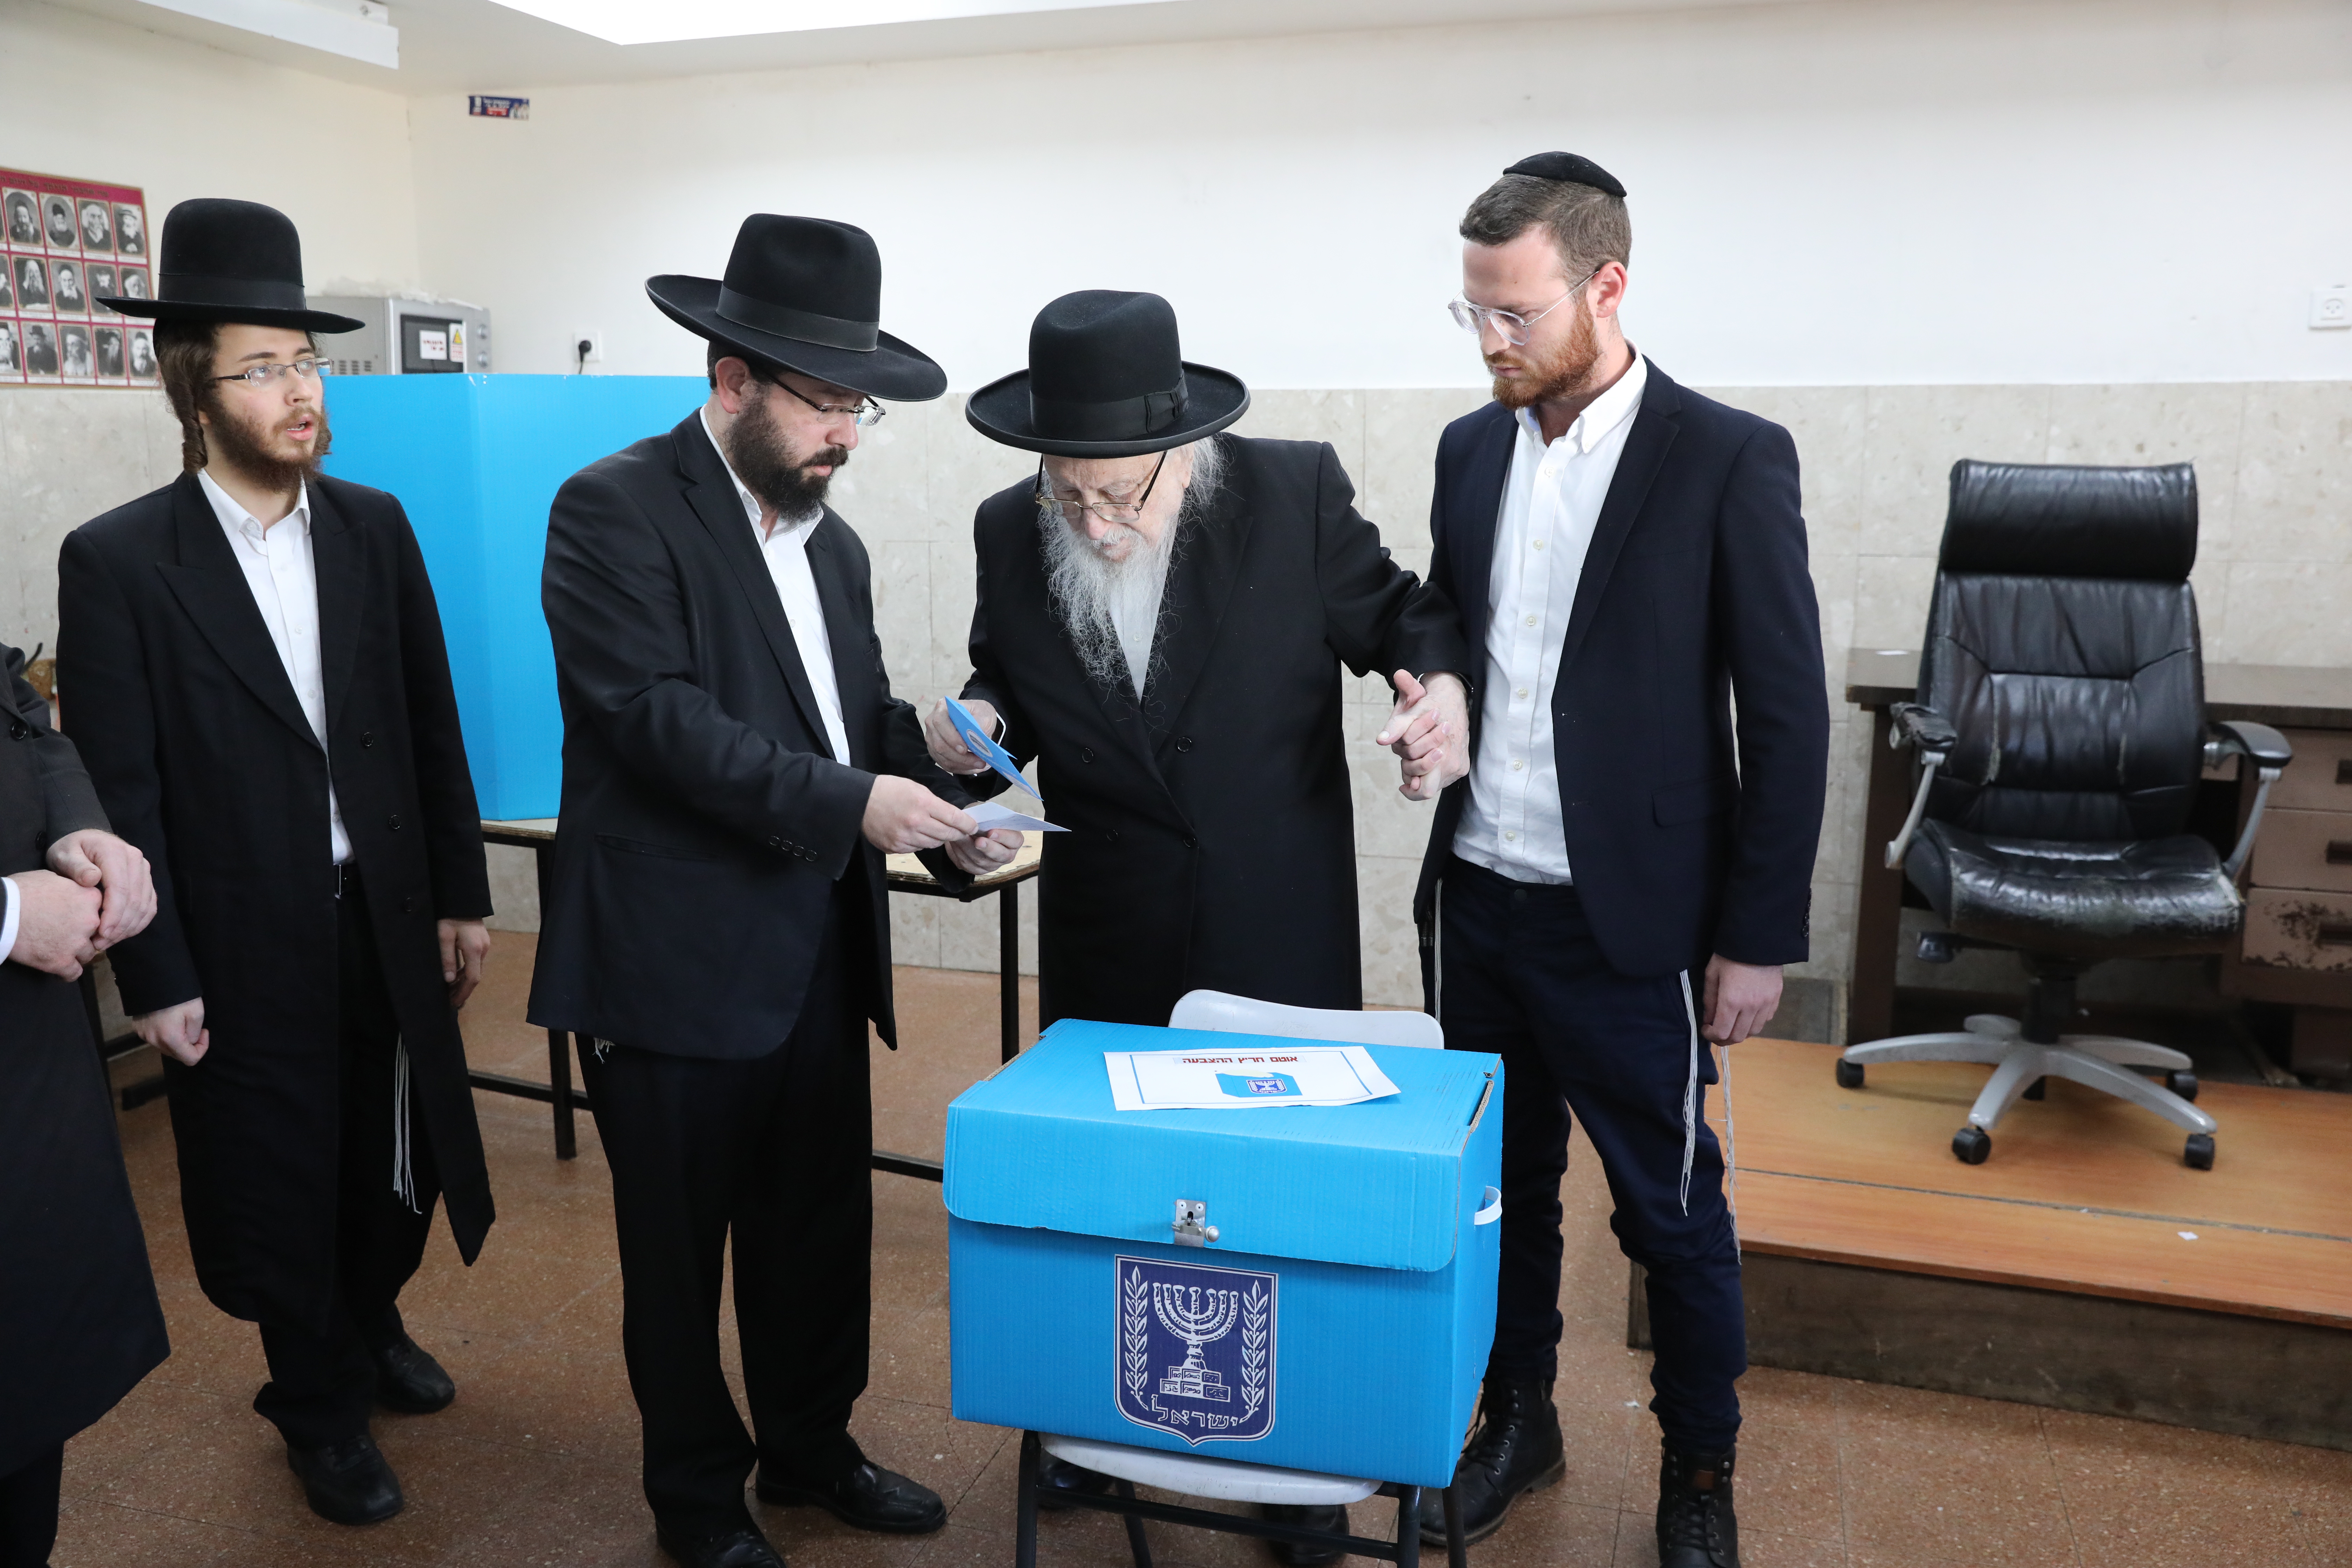 epa07847855 Ultra-Orthodox Jews cast their ballots at polling station during the Israeli legislative elections, in Jerusalem, Israel, 17 September 2019. Israelis are heading to the polls for a second general election, following the prior elections in April 2019, to elect the 120 members of the 22nd Knesset, or parliament. According to the Israel Central Bureau of Statistics, about six million people are eligible to vote.  EPA/ABIR SULTAN